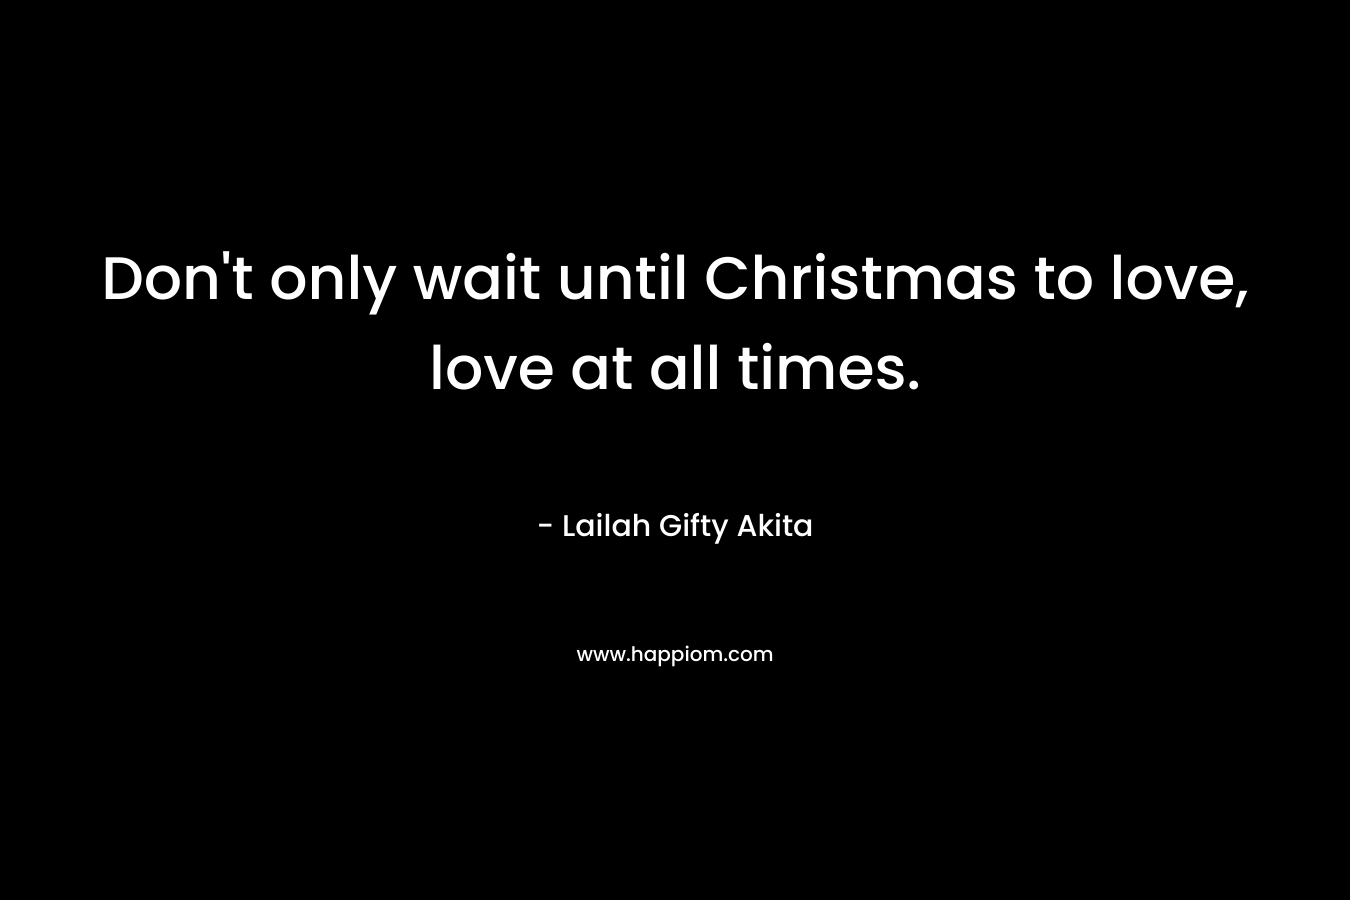 Don't only wait until Christmas to love, love at all times.